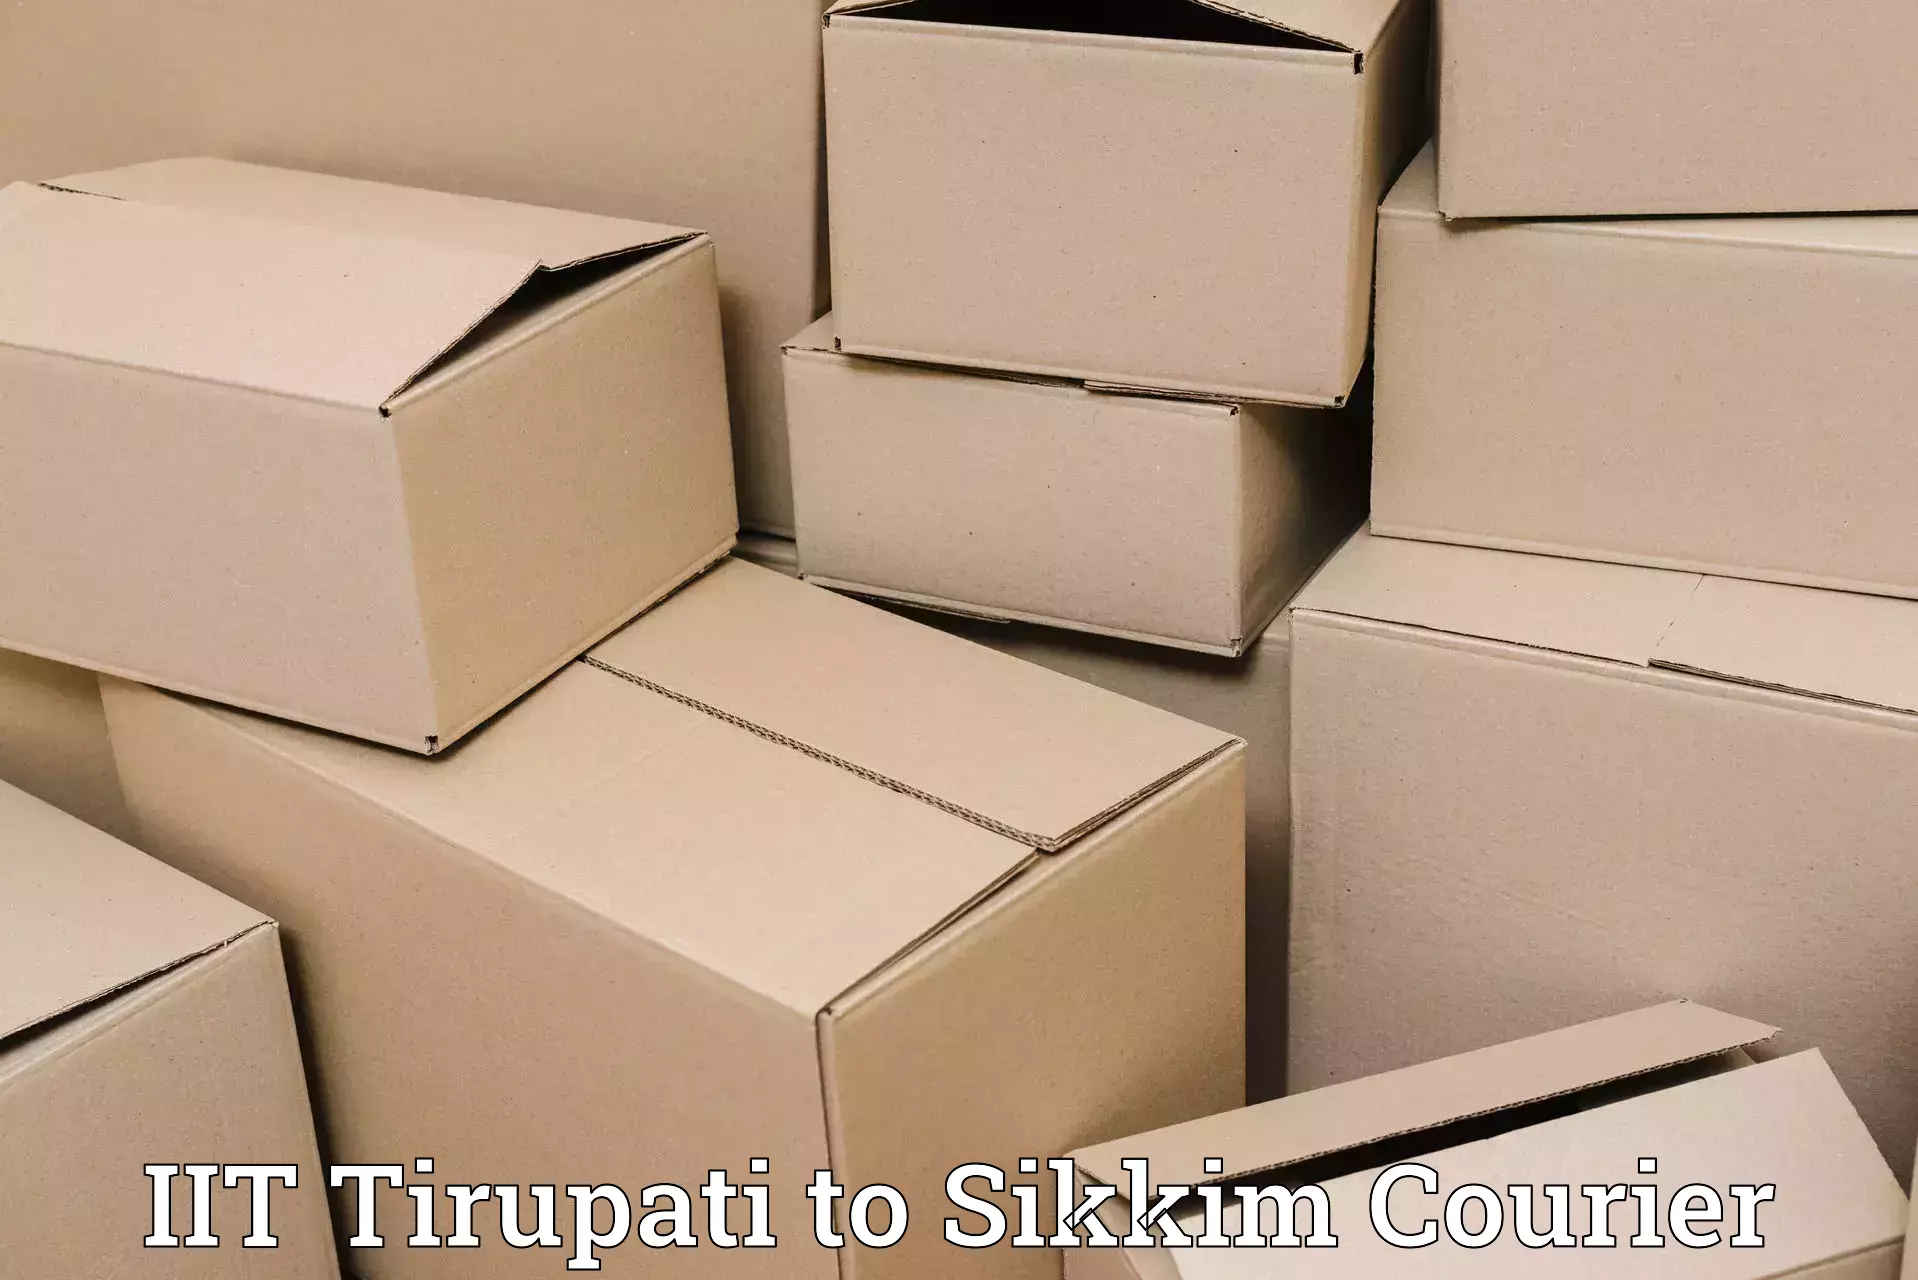 Large package courier IIT Tirupati to Ranipool